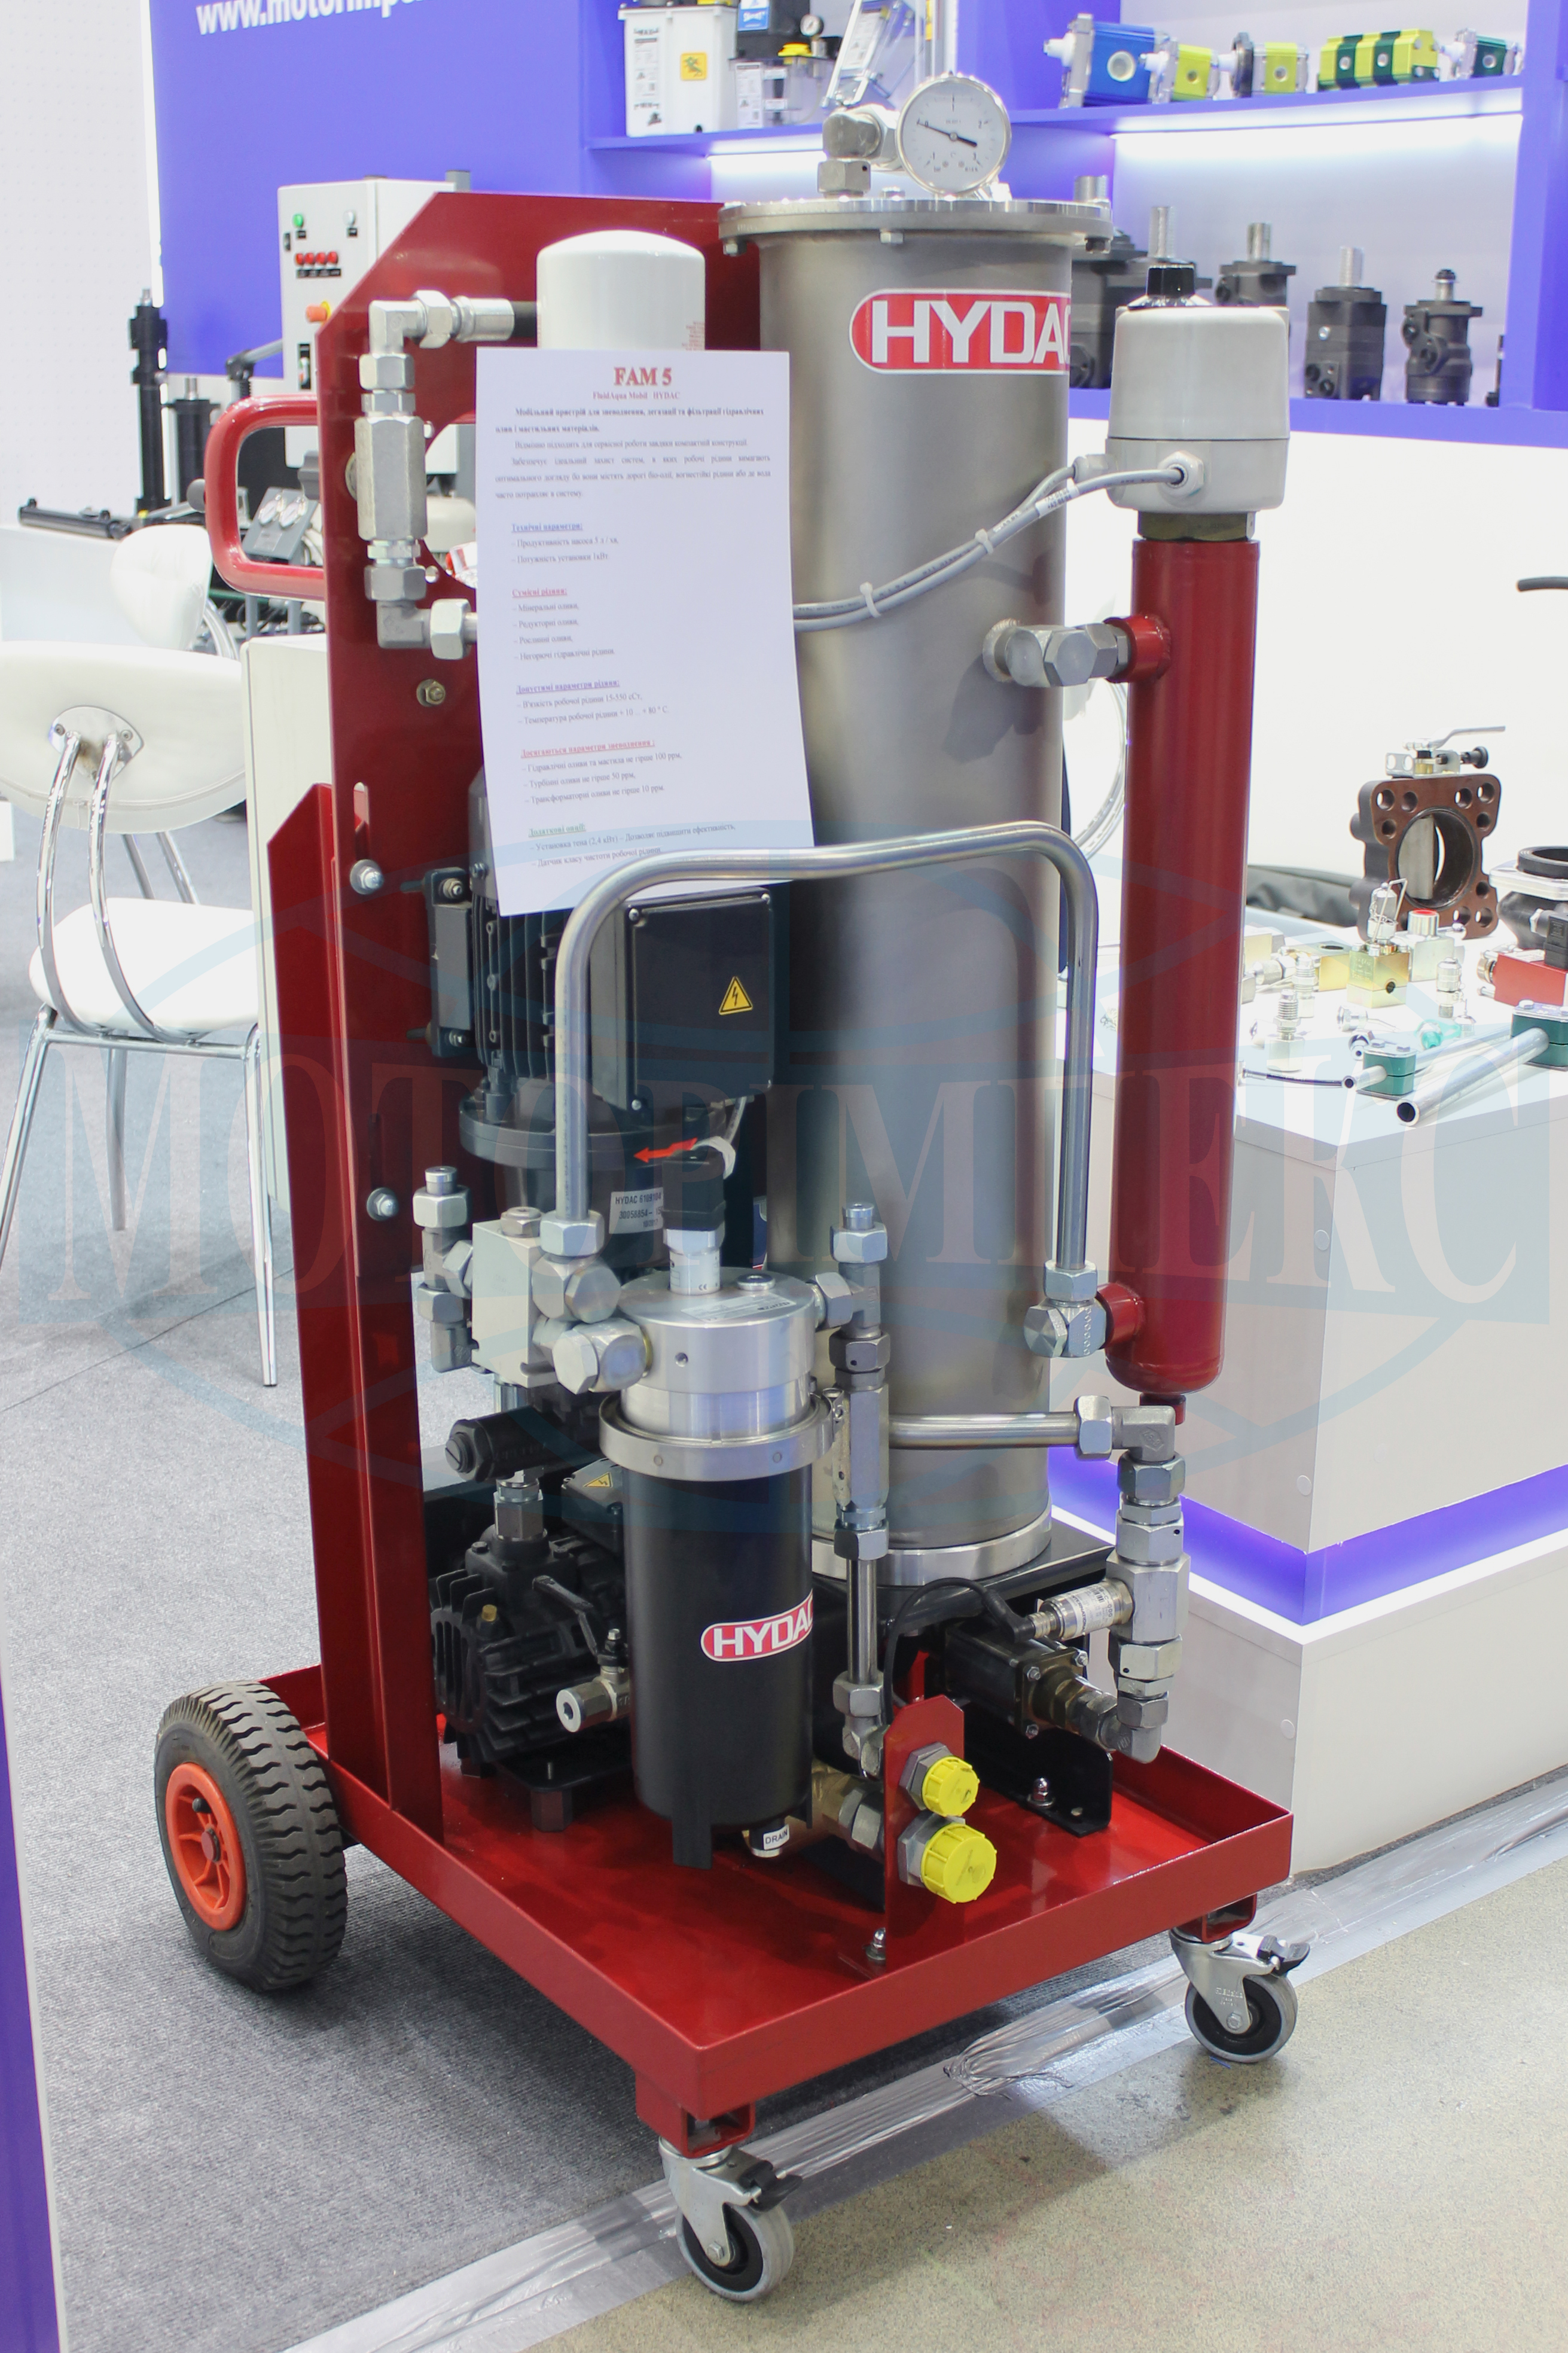 FAM5 system for dehydration, degassing and filtration of hydraulic oils and lubricants